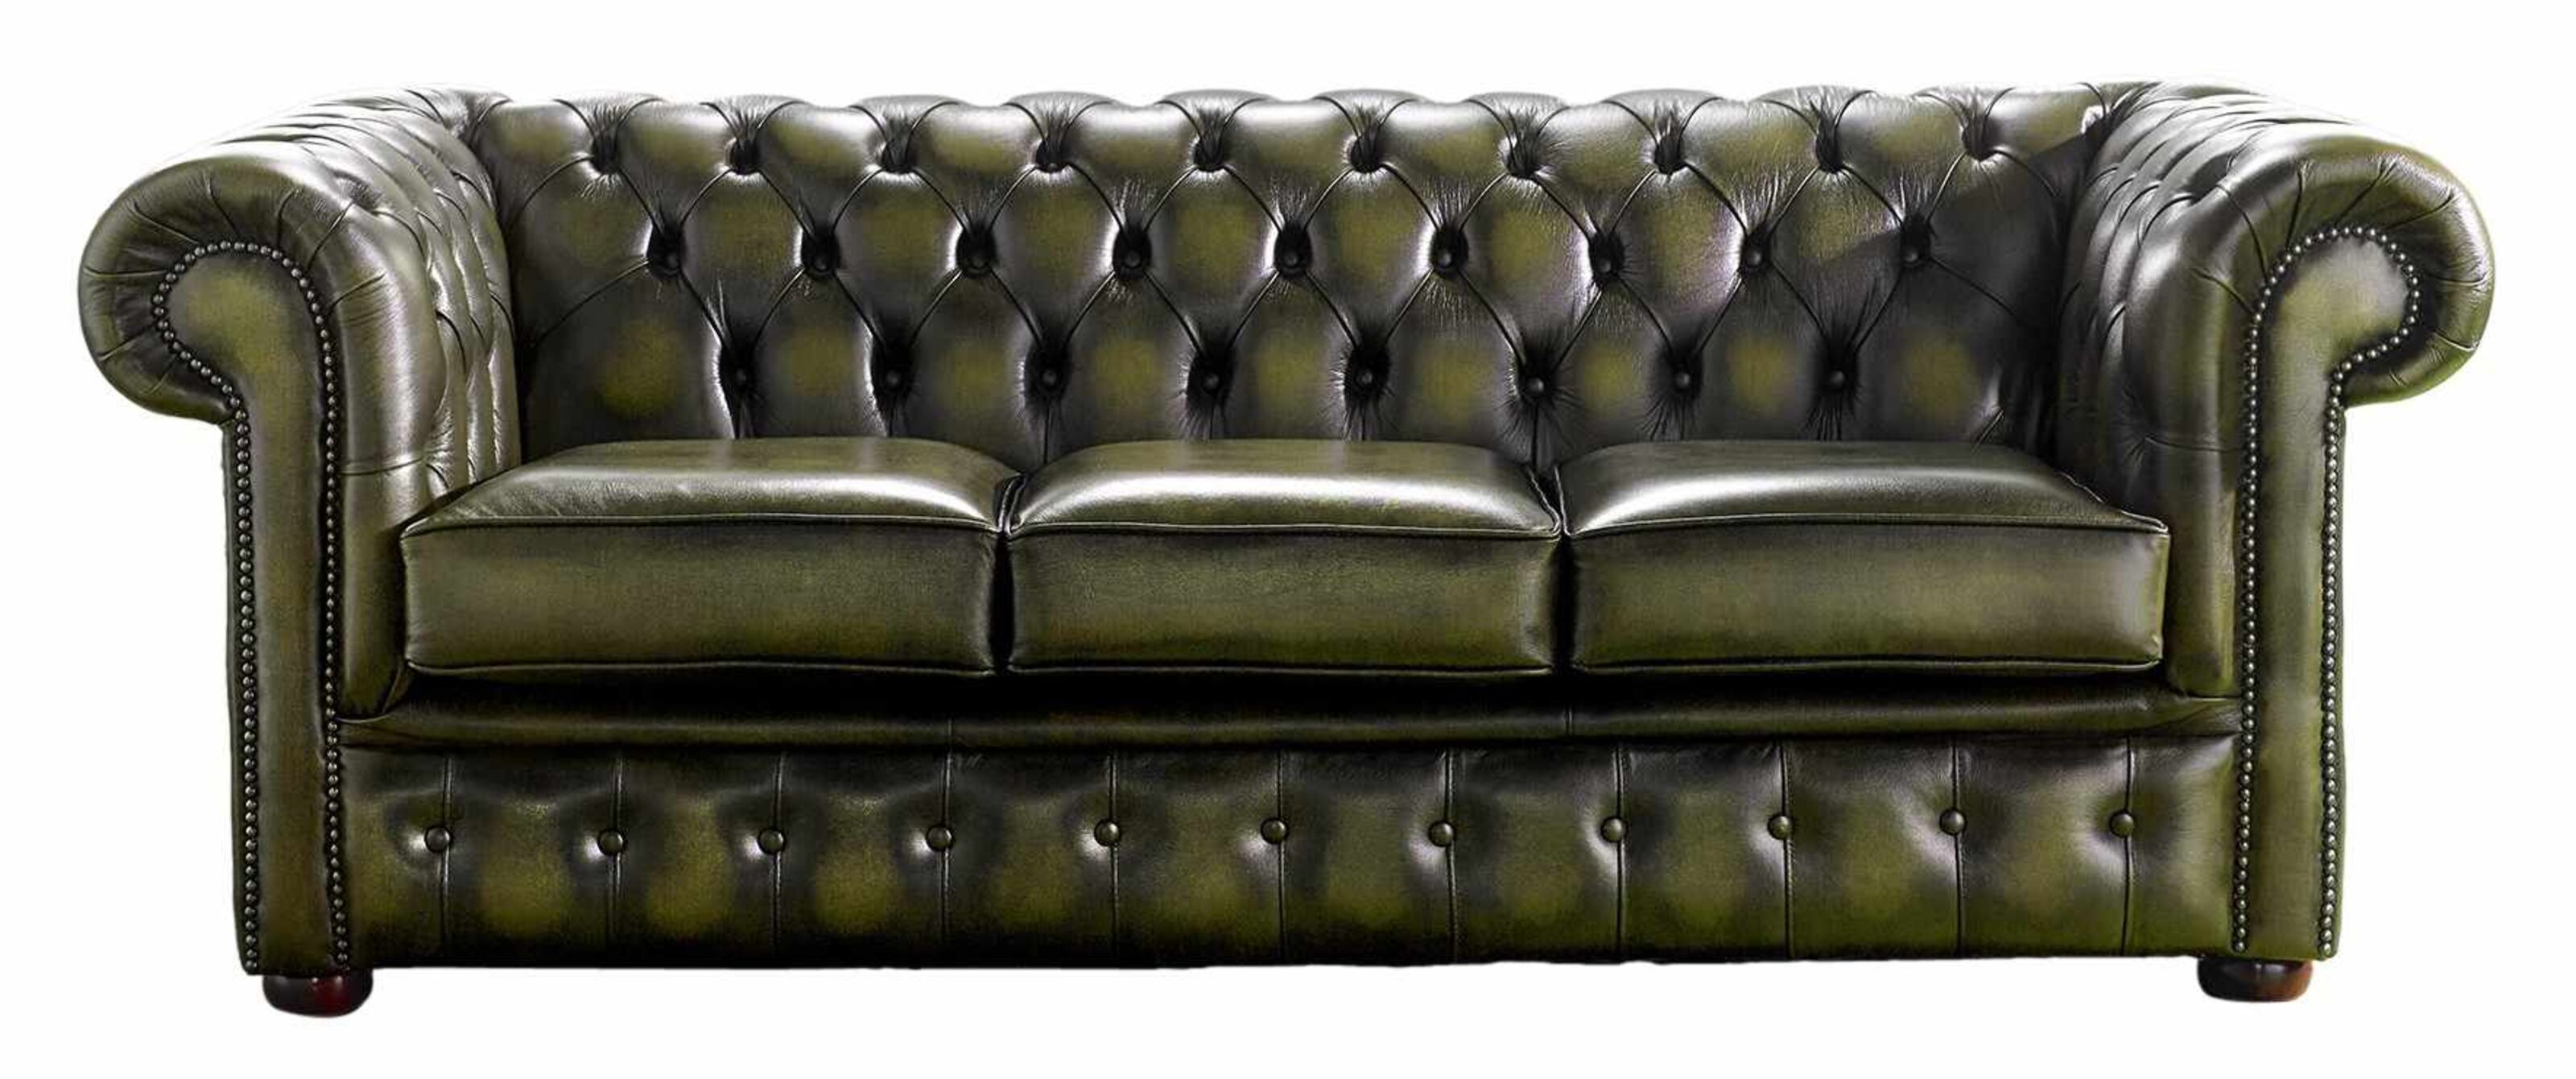 Cushioned Comfort Chesterfield Sofas with Plush Padding  %Post Title